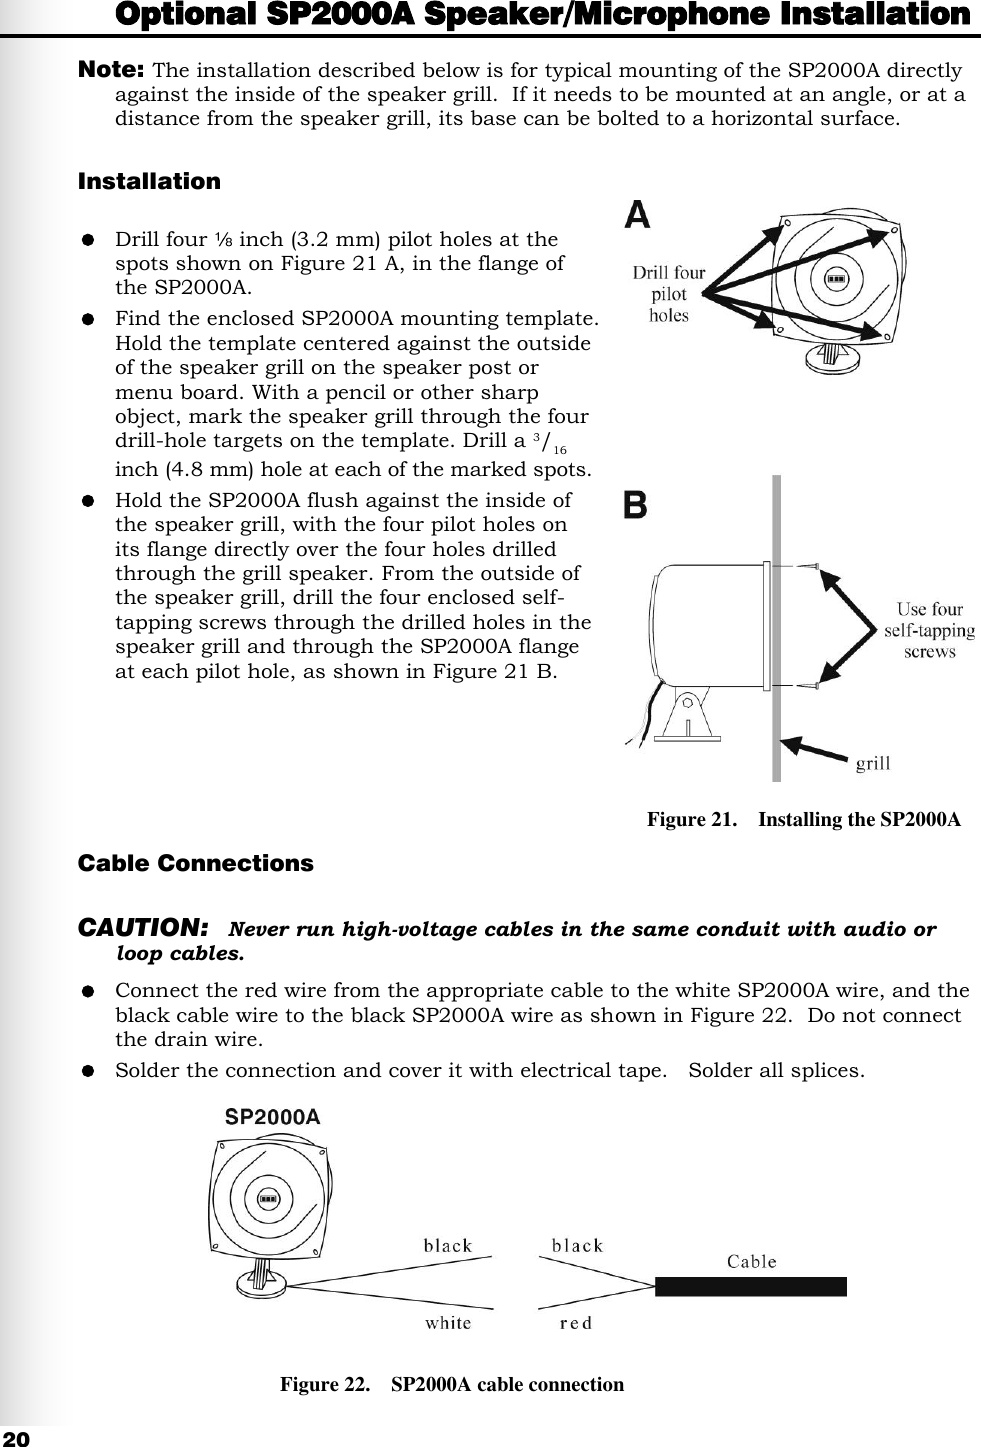   20 Optional SP2000A Speaker/Microphone Installation Note:  The installation described below is for typical mounting of the SP2000A directly against the inside of the speaker grill.  If it needs to be mounted at an angle, or at a distance from the speaker grill, its base can be bolted to a horizontal surface.  Installation   Drill four   inch (3.2 mm) pilot holes at the spots shown on Figure 21 A, in the flange of the SP2000A.  Find the enclosed SP2000A mounting template. Hold the template centered against the outside of the speaker grill on the speaker post or menu board. With a pencil or other sharp object, mark the speaker grill through the four drill-hole targets on the template. Drill a 3/16 inch (4.8 mm) hole at each of the marked spots.  Hold the SP2000A flush against the inside of the speaker grill, with the four pilot holes on  its flange directly over the four holes drilled through the grill speaker. From the outside of the speaker grill, drill the four enclosed self- tapping screws through the drilled holes in the speaker grill and through the SP2000A flange at each pilot hole, as shown in Figure 21 B.      Cable Connections  CAUTION: Never run high-voltage cables in the same conduit with audio or loop cables.  Connect the red wire from the appropriate cable to the white SP2000A wire, and the black cable wire to the black SP2000A wire as shown in Figure 22.  Do not connect the drain wire.    Solder the connection and cover it with electrical tape.   Solder all splices.          Figure 21.    Installing the SP2000A Figure 22.    SP2000A cable connection 